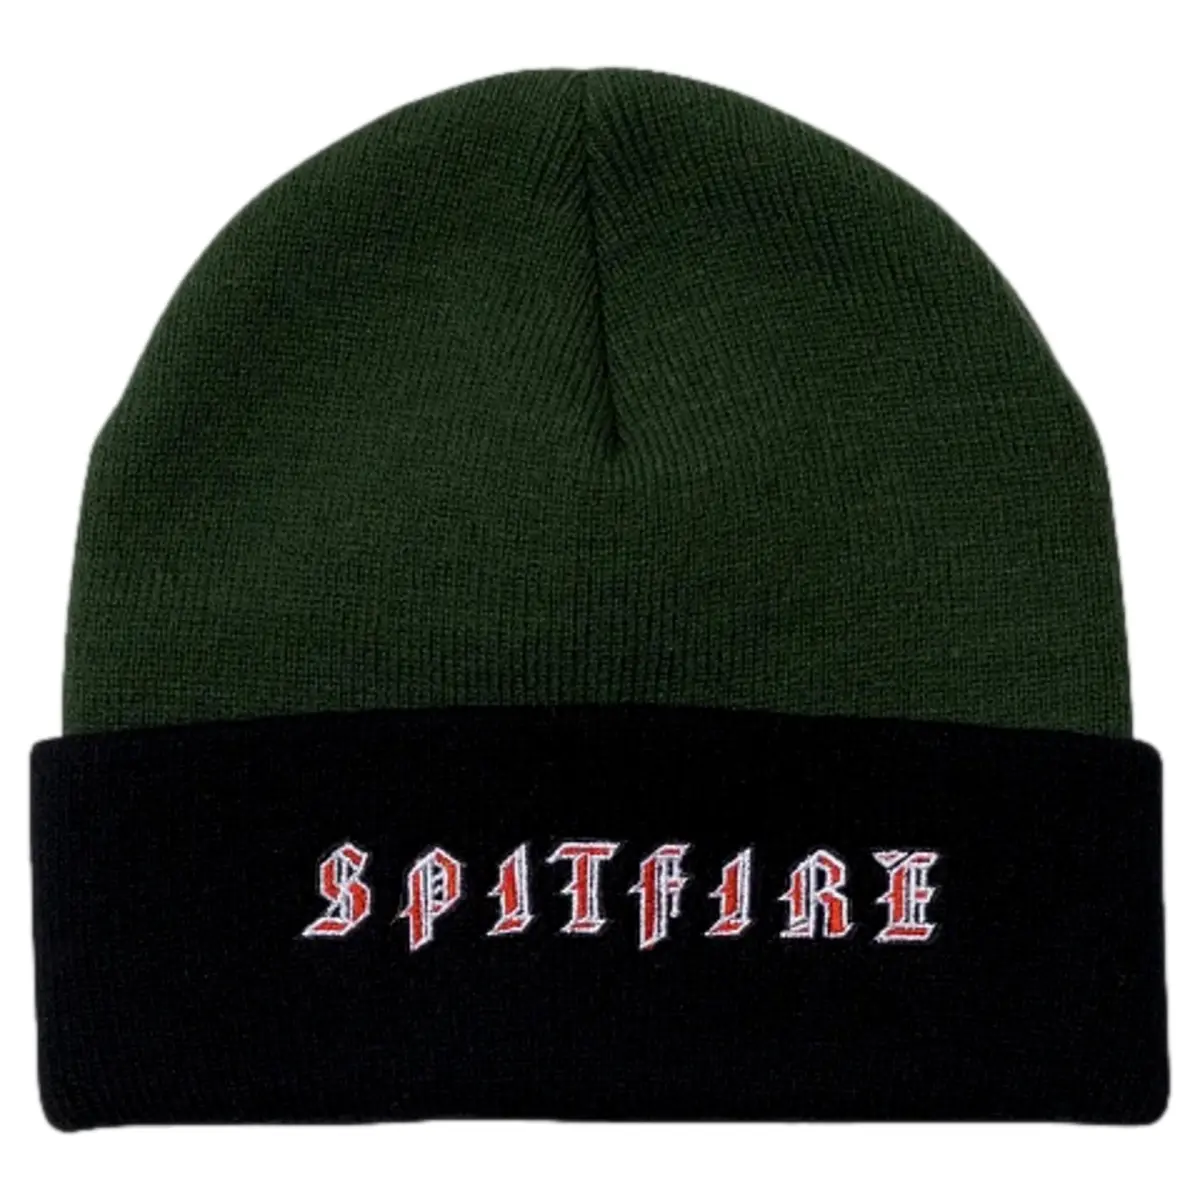 Spitfire beanie old cuff green and black